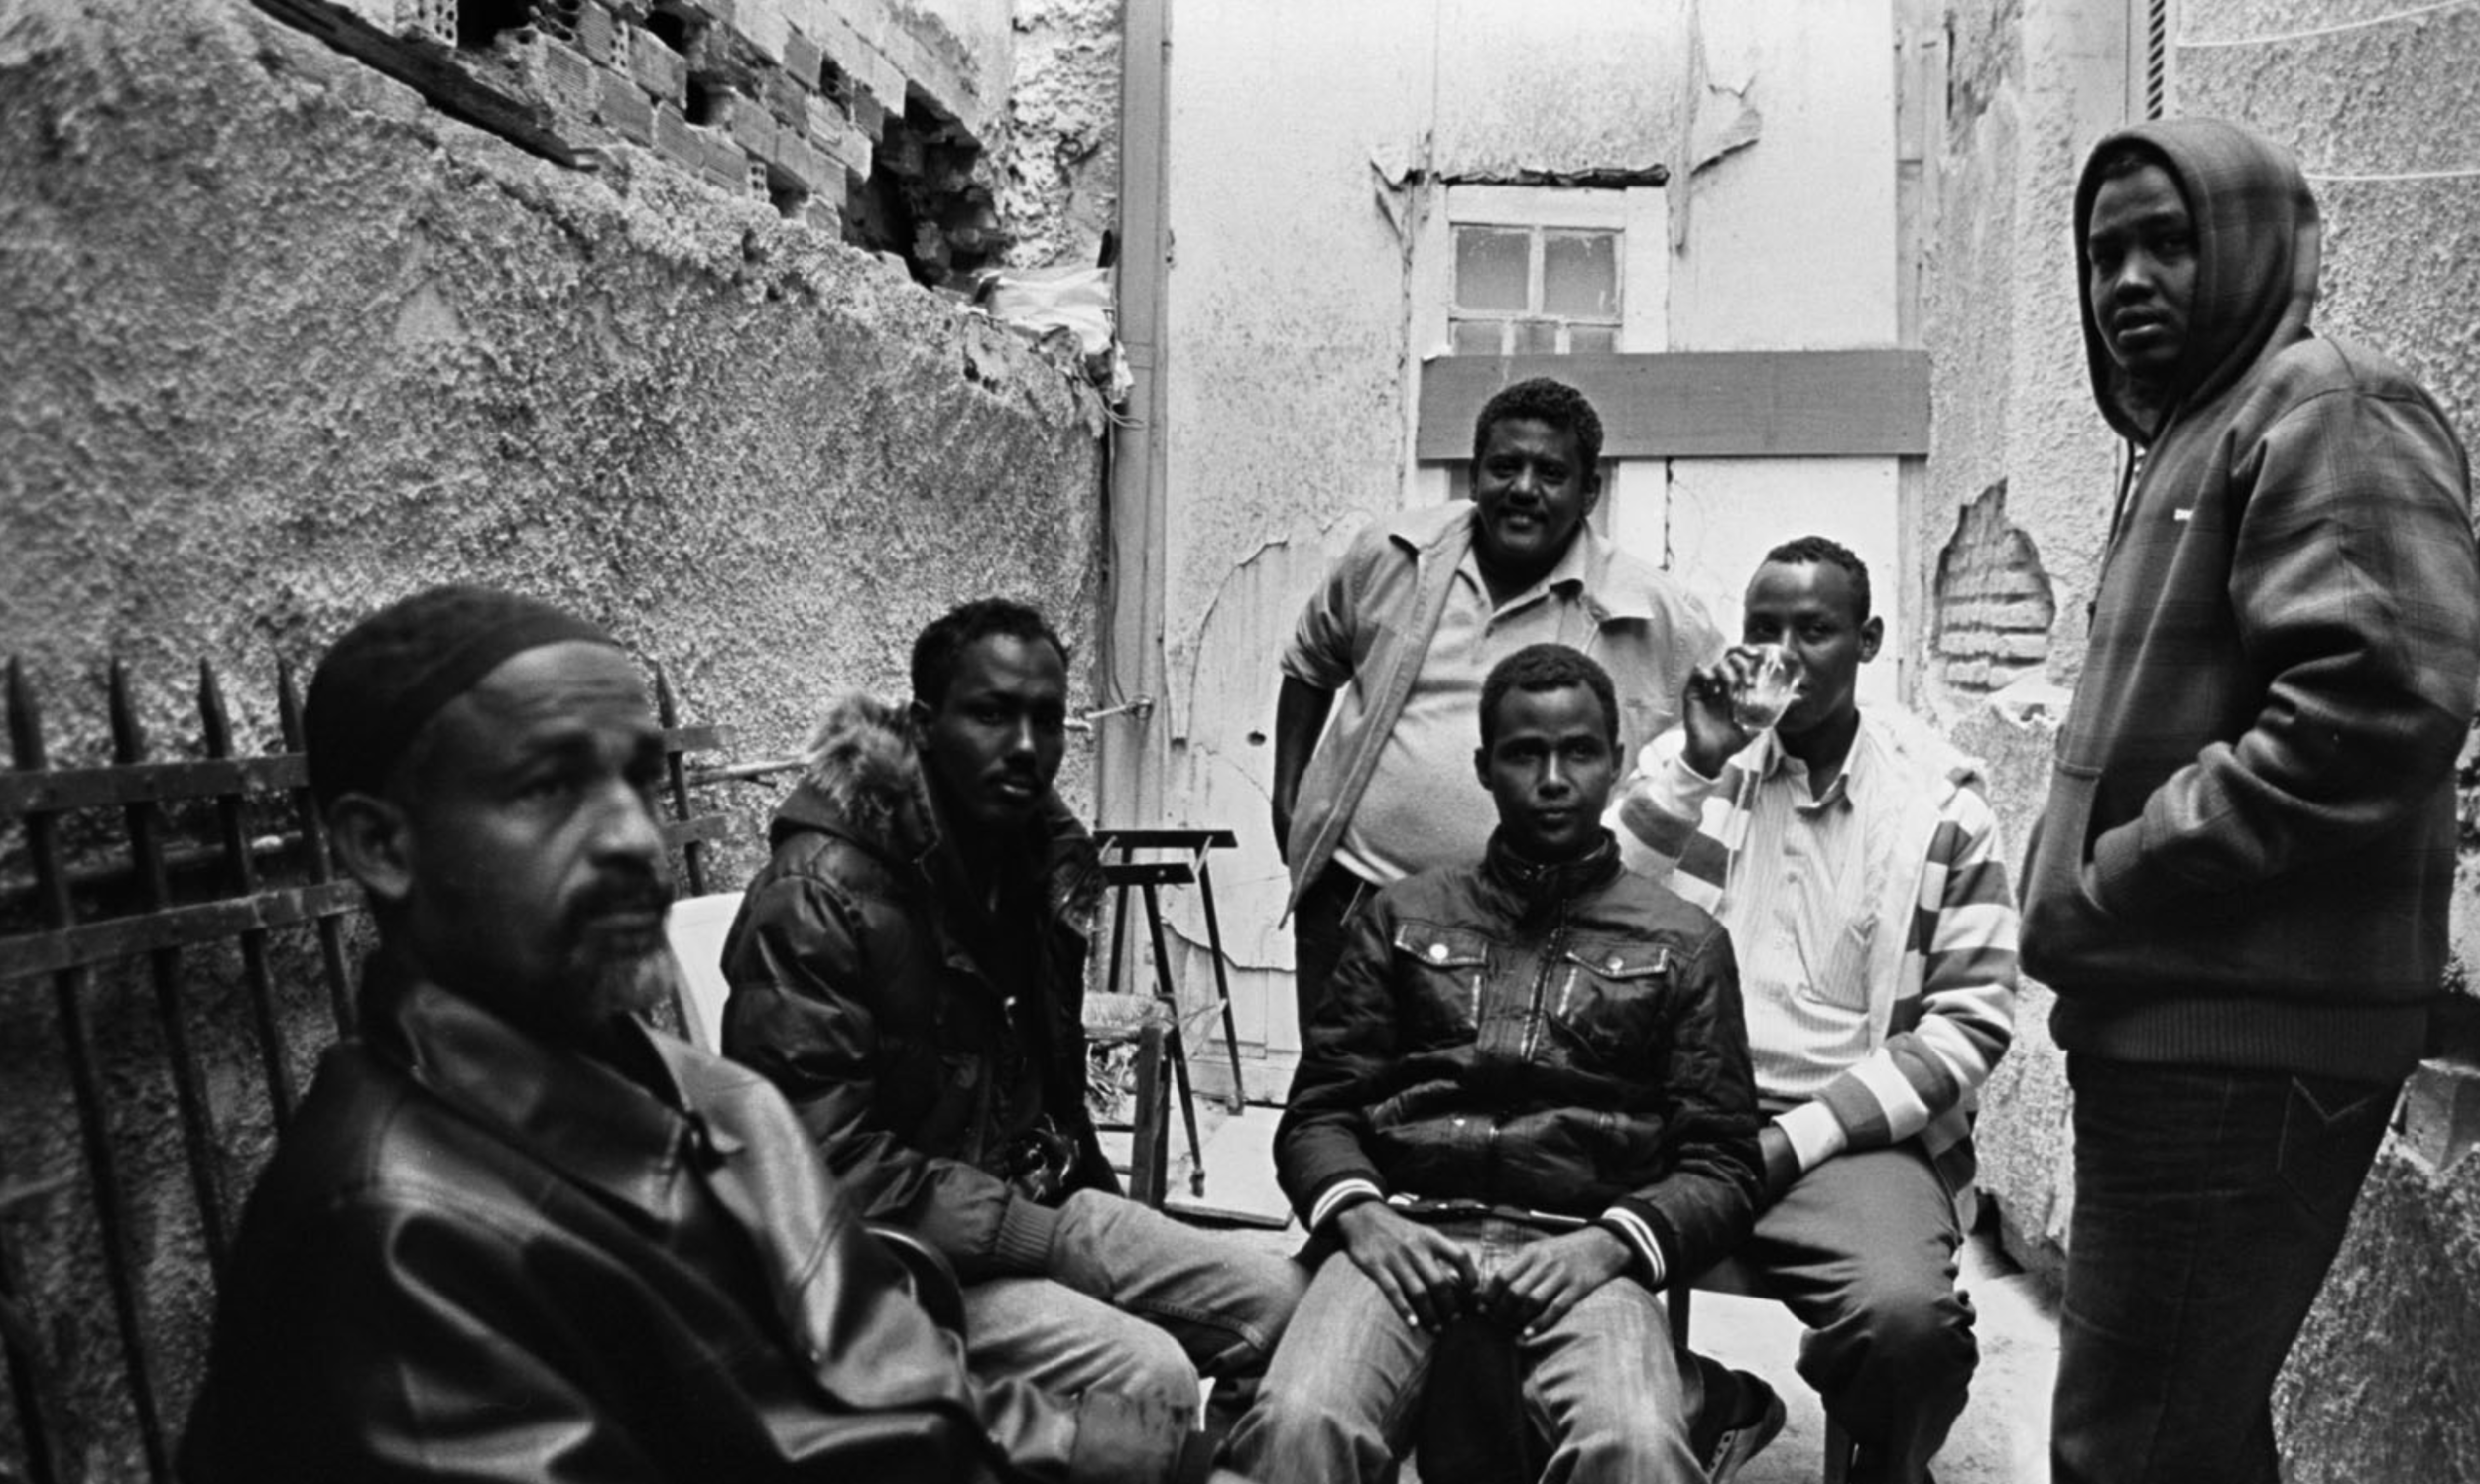  Somali Migrants at the makeshift Somali Community Centre in Central Athens. Somali migrants have occupied a derelict building and transformed it into a functioning resource for Somalis, which includes a restaurant, an office area, a praying room, a 